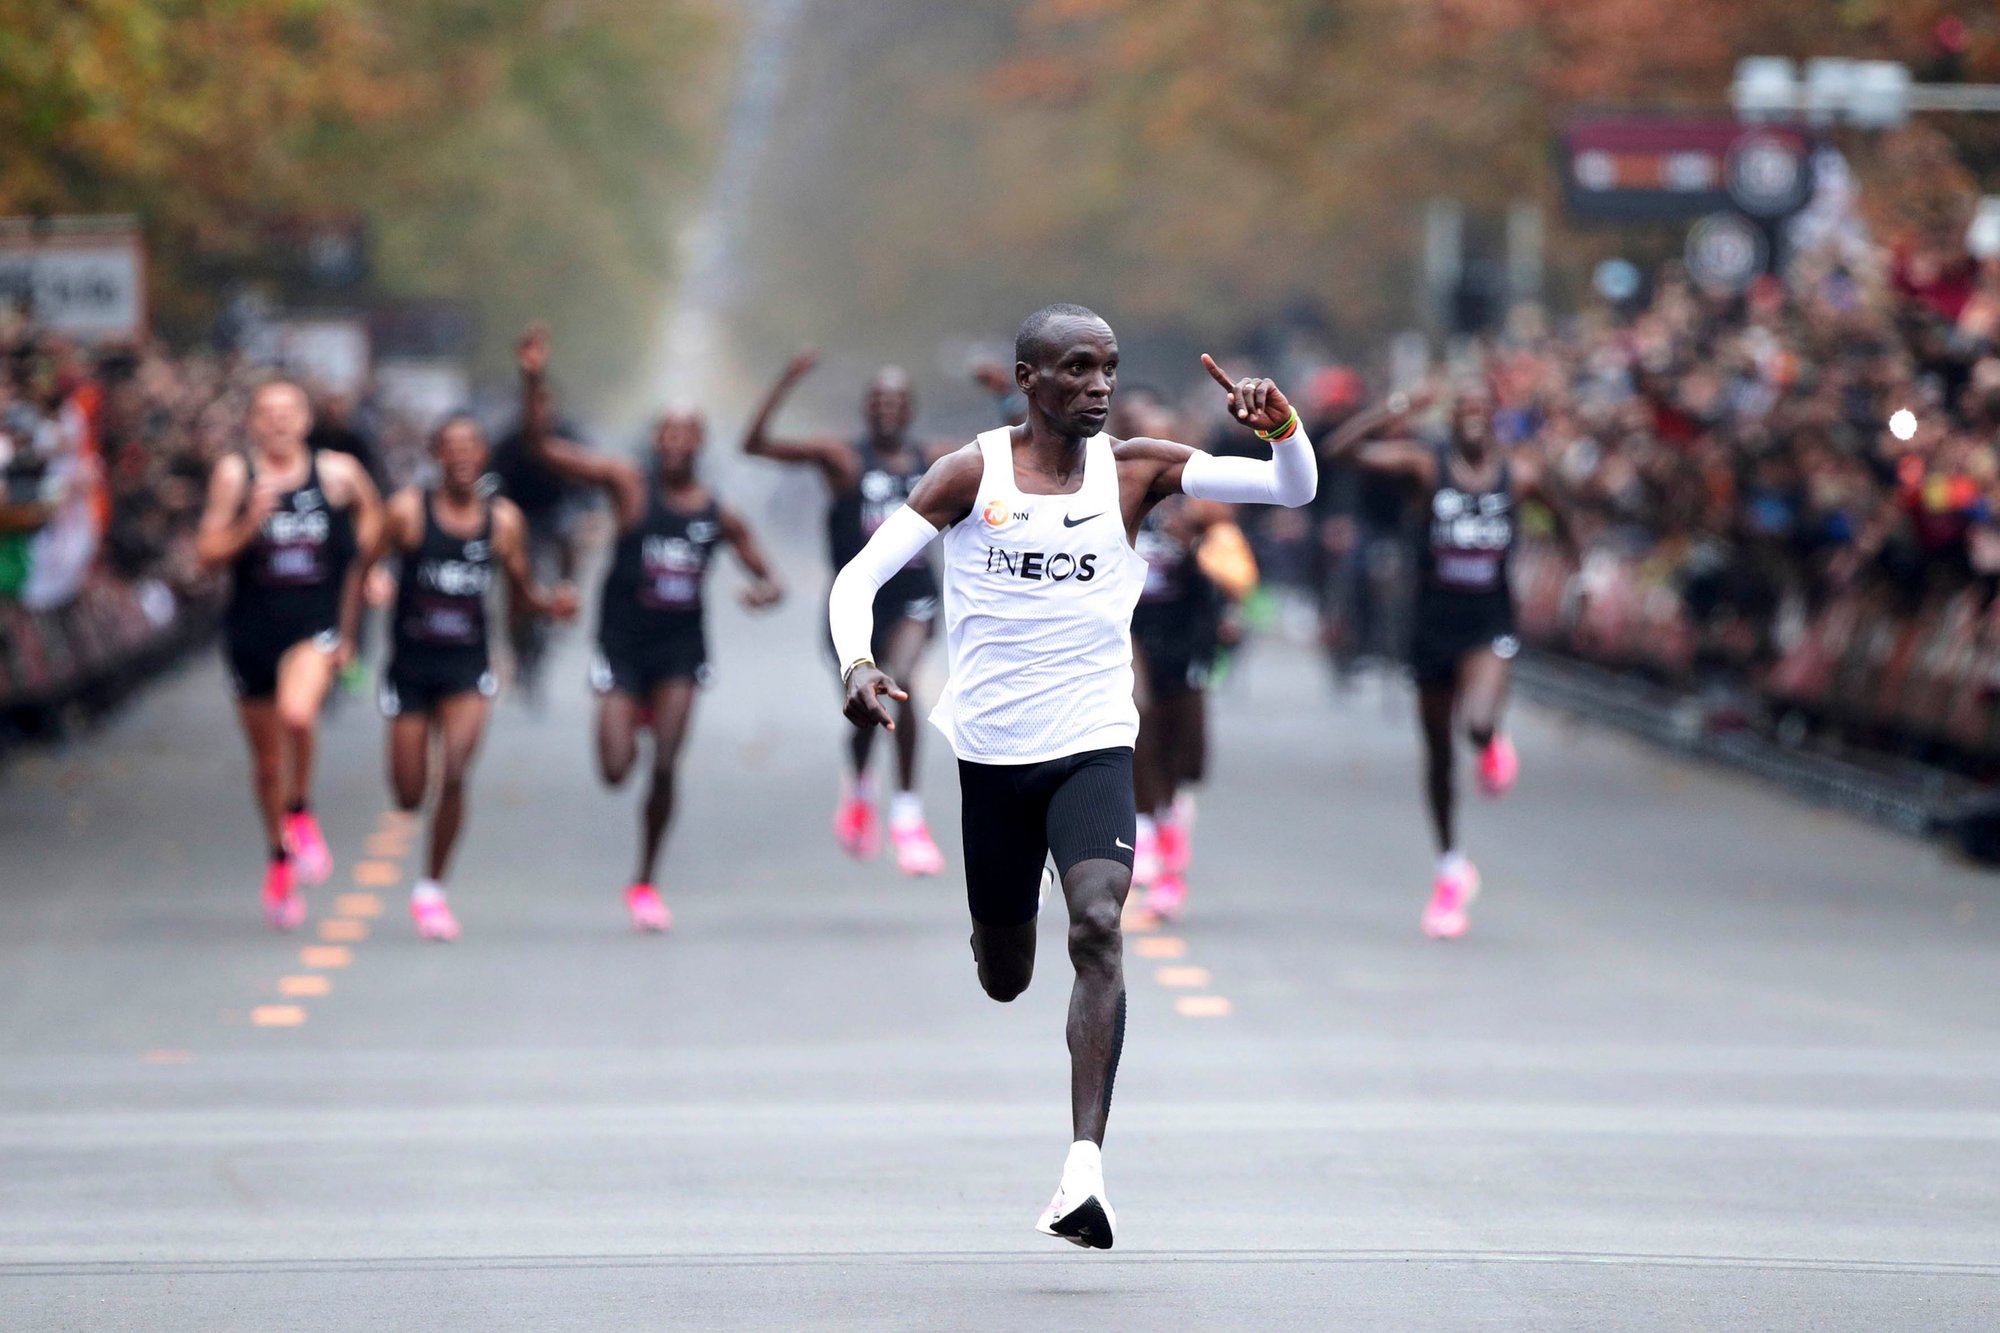 Eliud Kipchoge celebrates when passing the finish line at the INEOS 1:59 Challenge